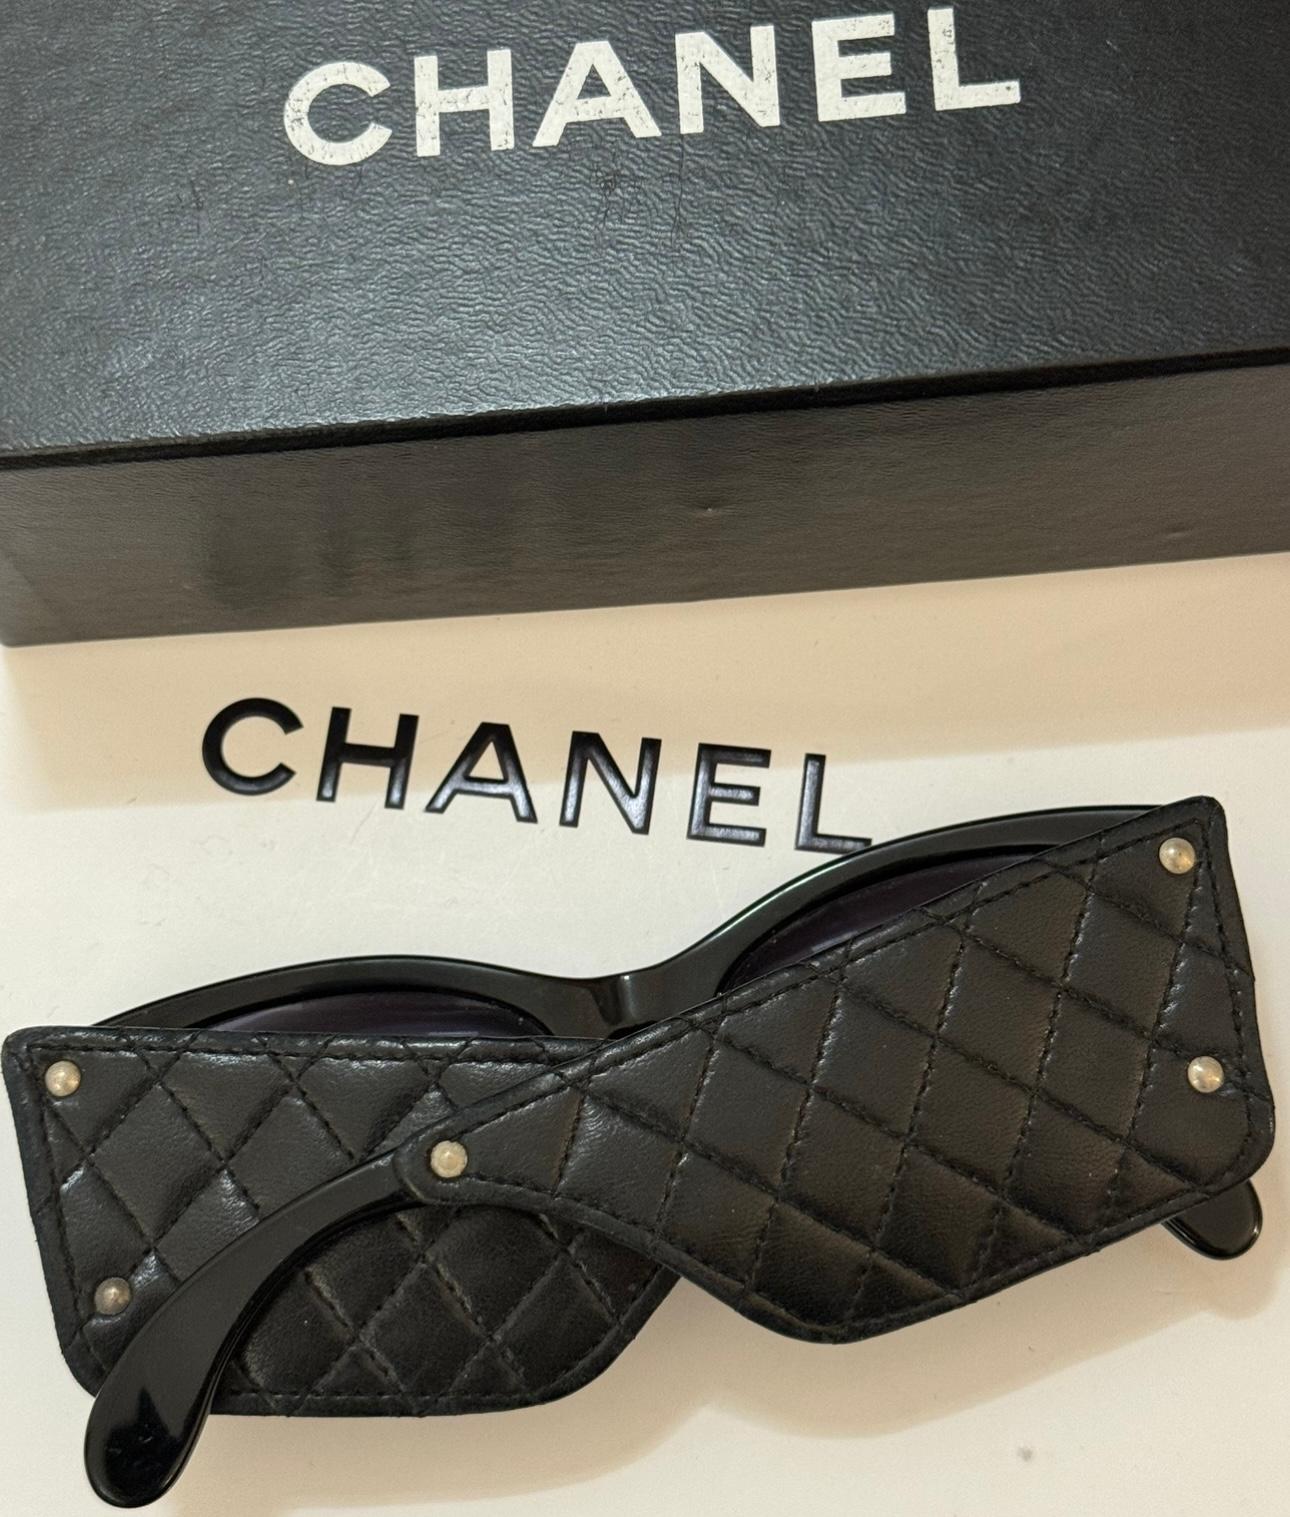 Rare Chanel runway 1988 vintage aviator pilot sunglasses with black quilted leather on the sides, worn by Rihanna, collector and worn by Ines de La fressange. Very good vintage condition 